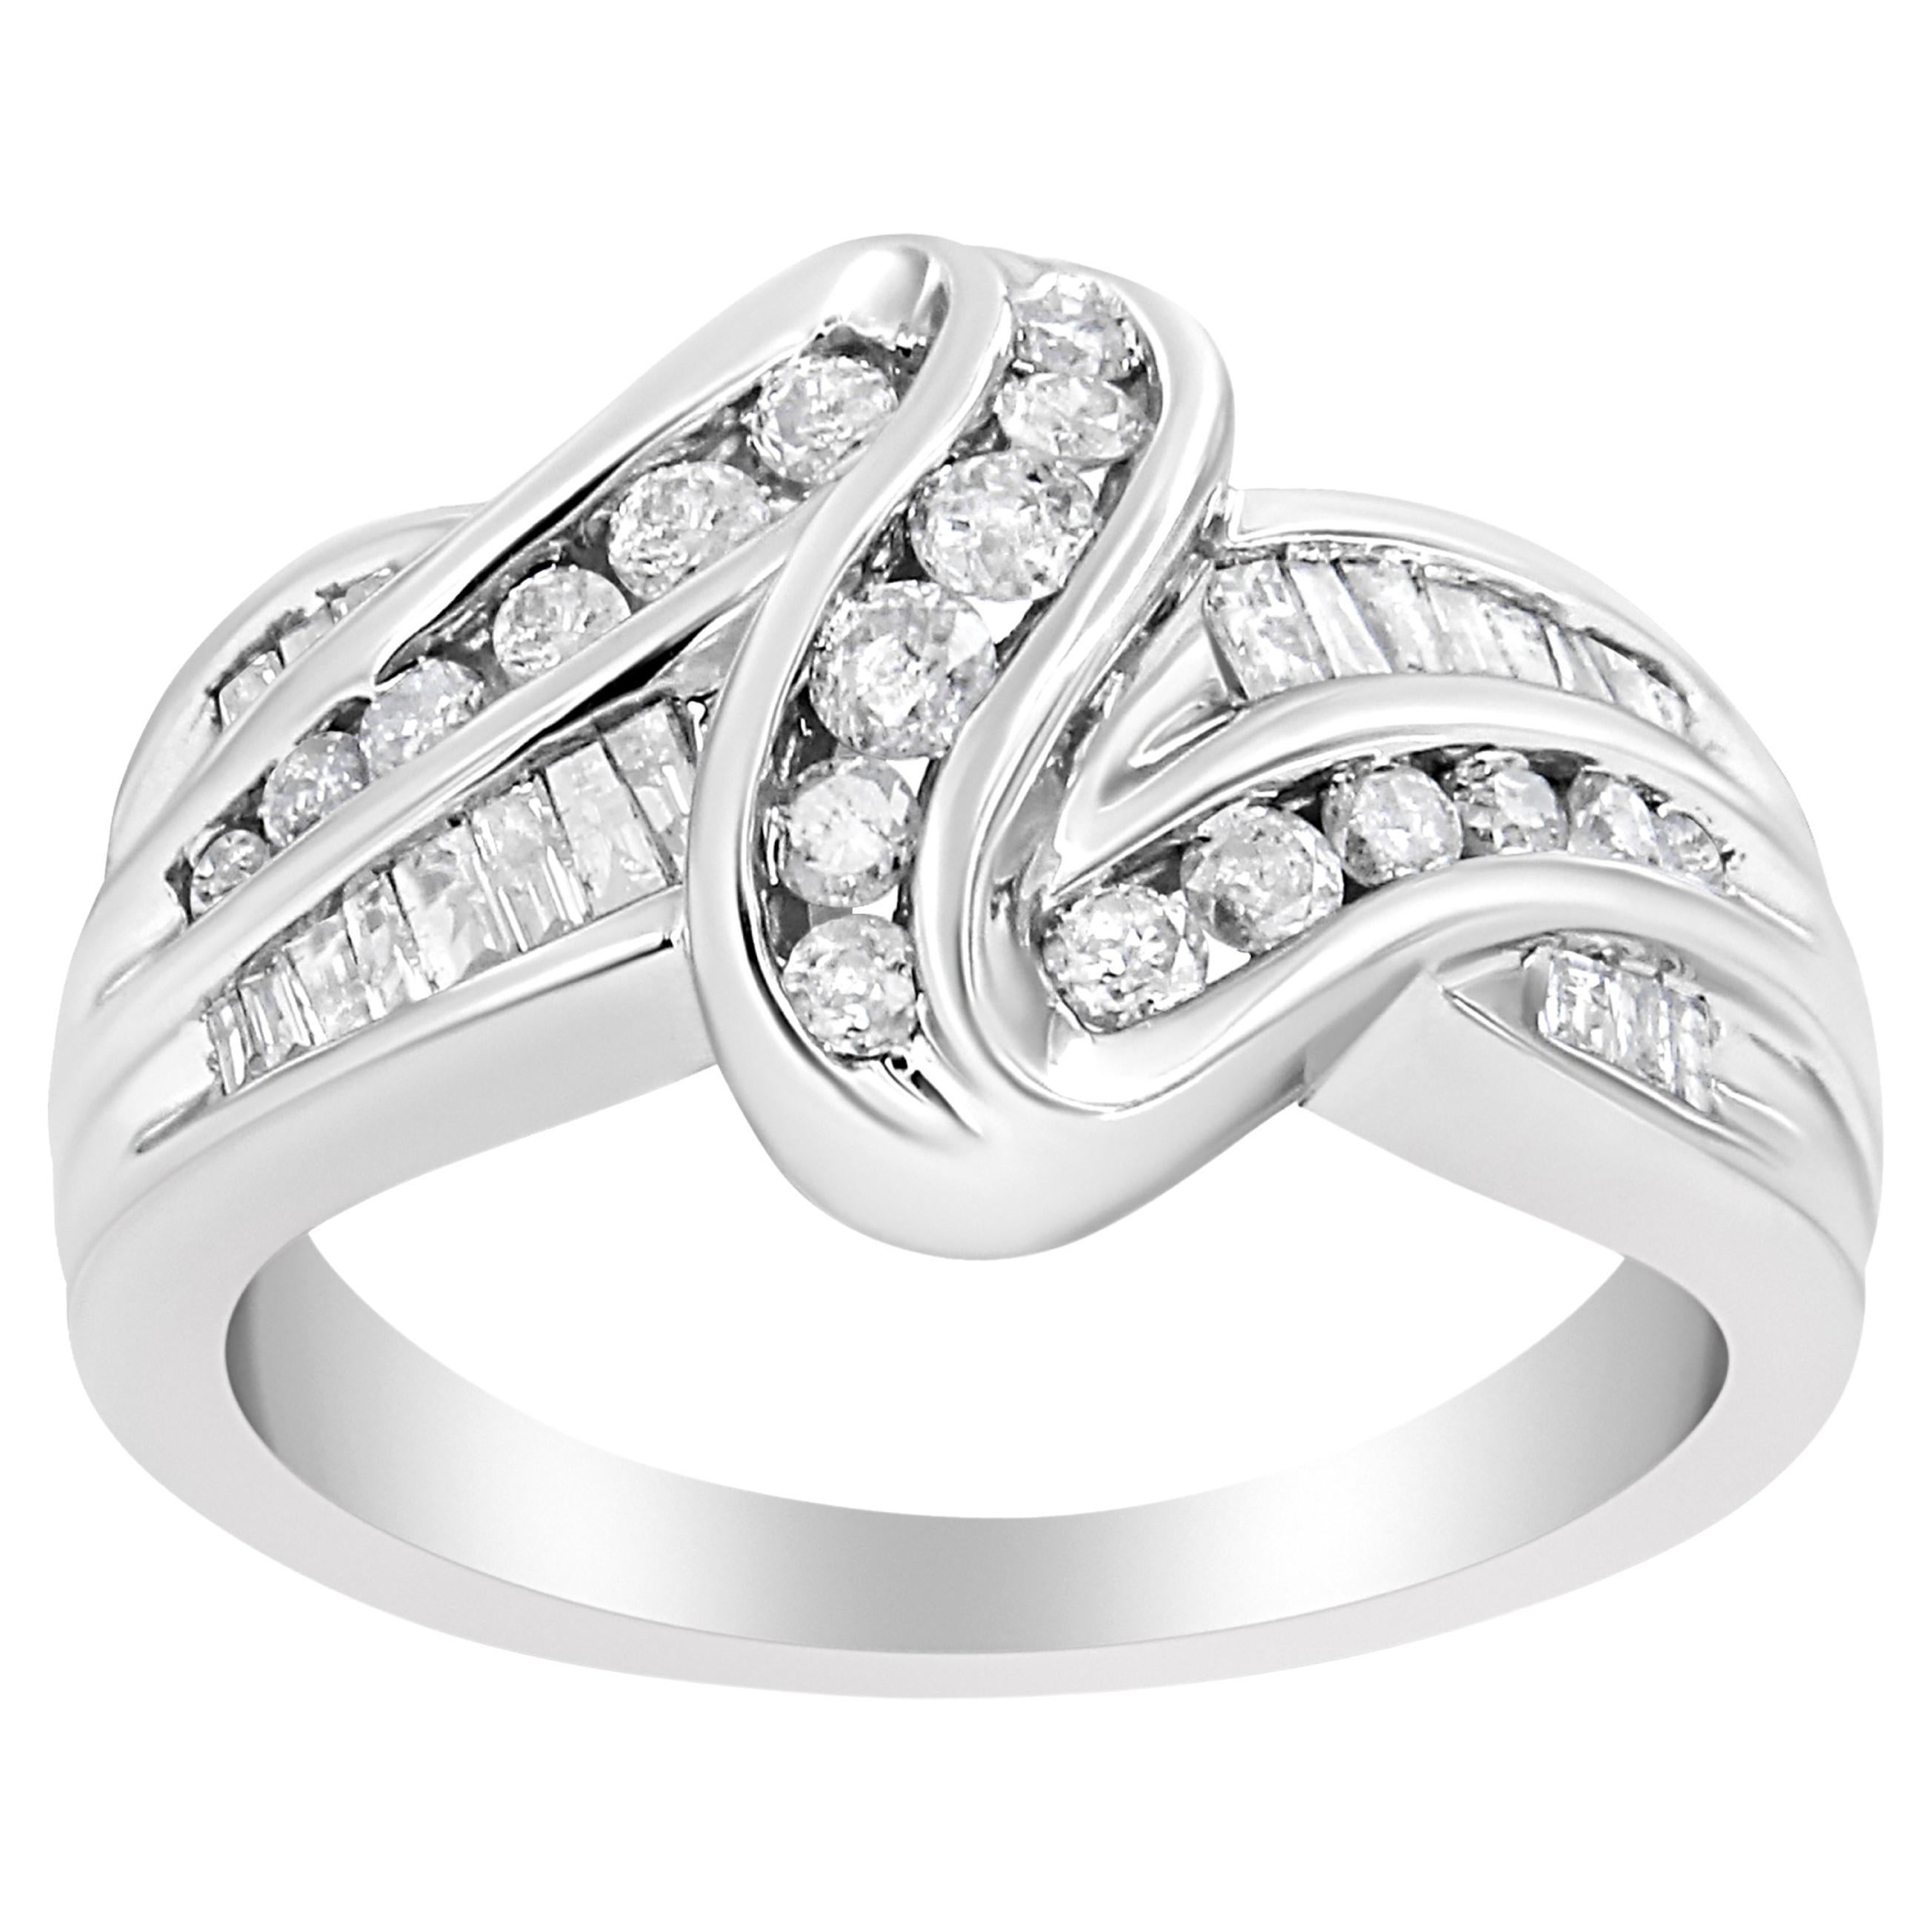 For Sale:  10K White Gold Ring 3/4 Carat Round and Baguette-Cut Diamond Bypass Ring